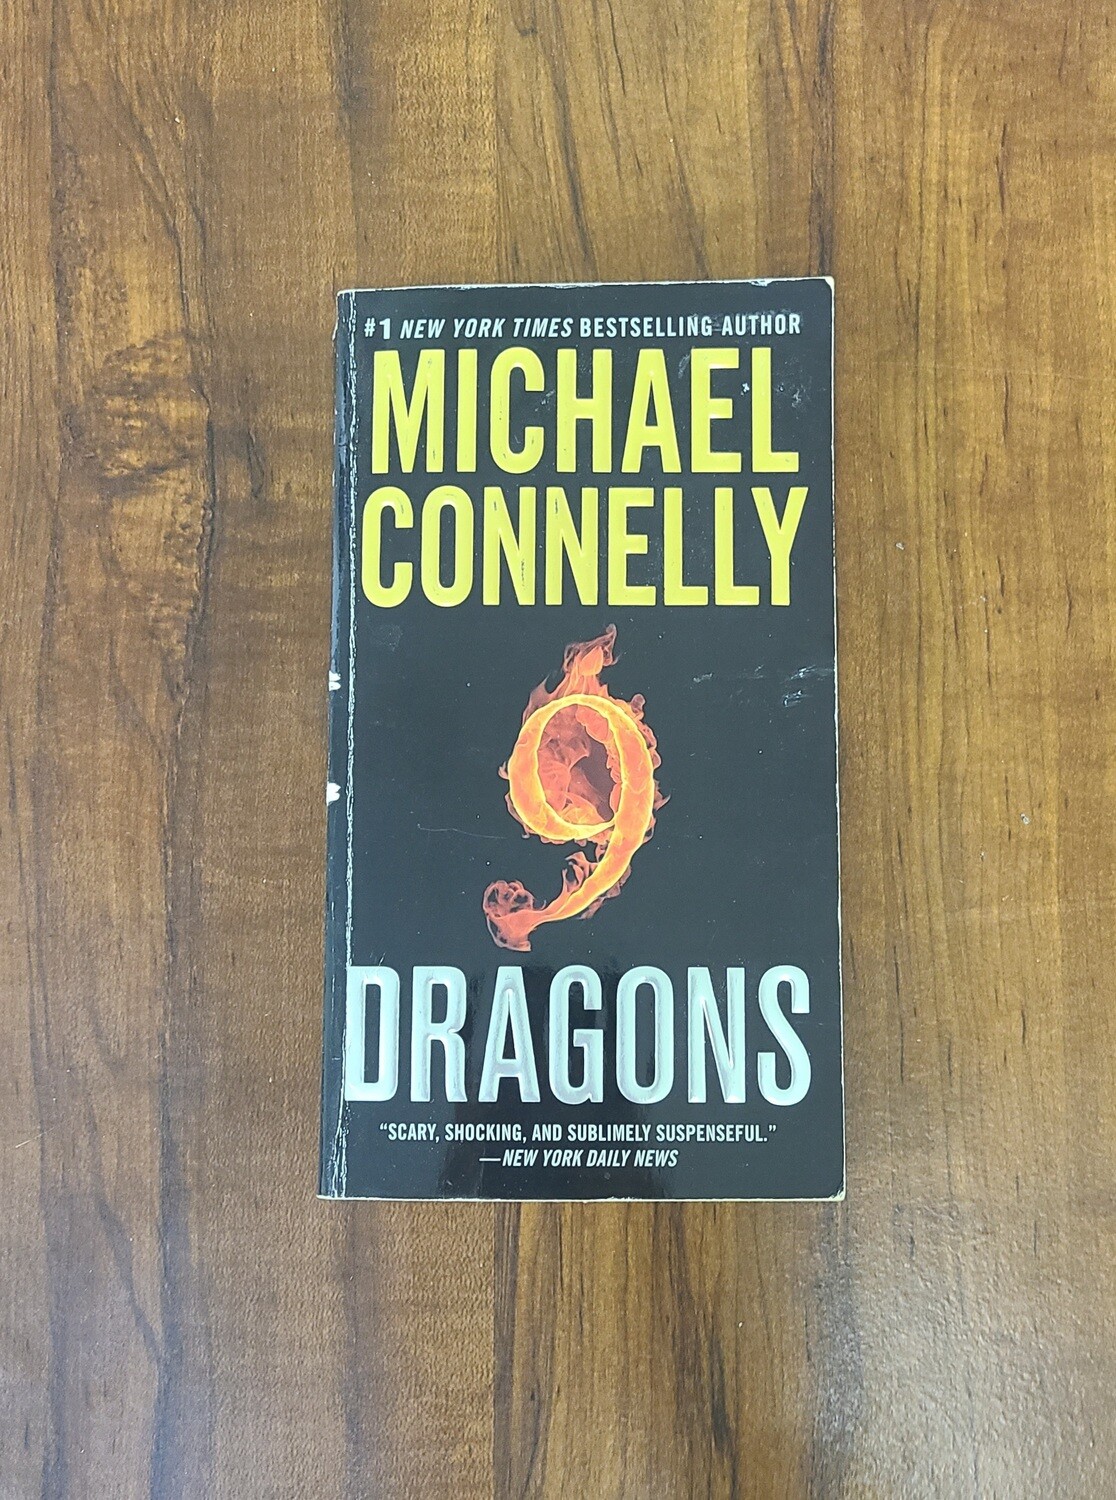 9 Dragons by Michael Connelly